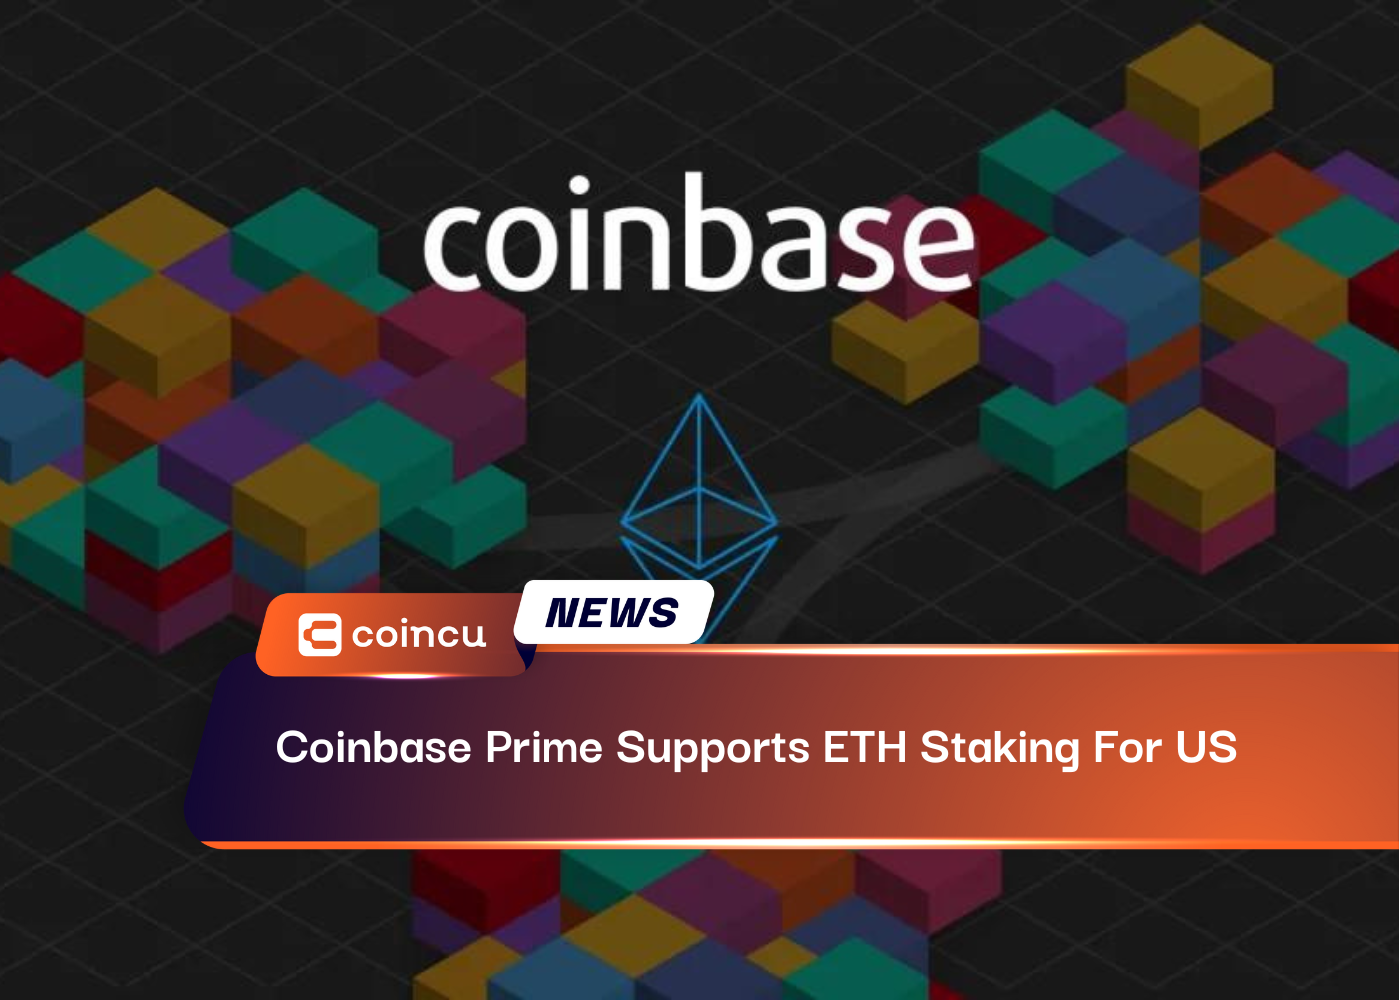 Coinbase Prime Supports ETH Staking For US